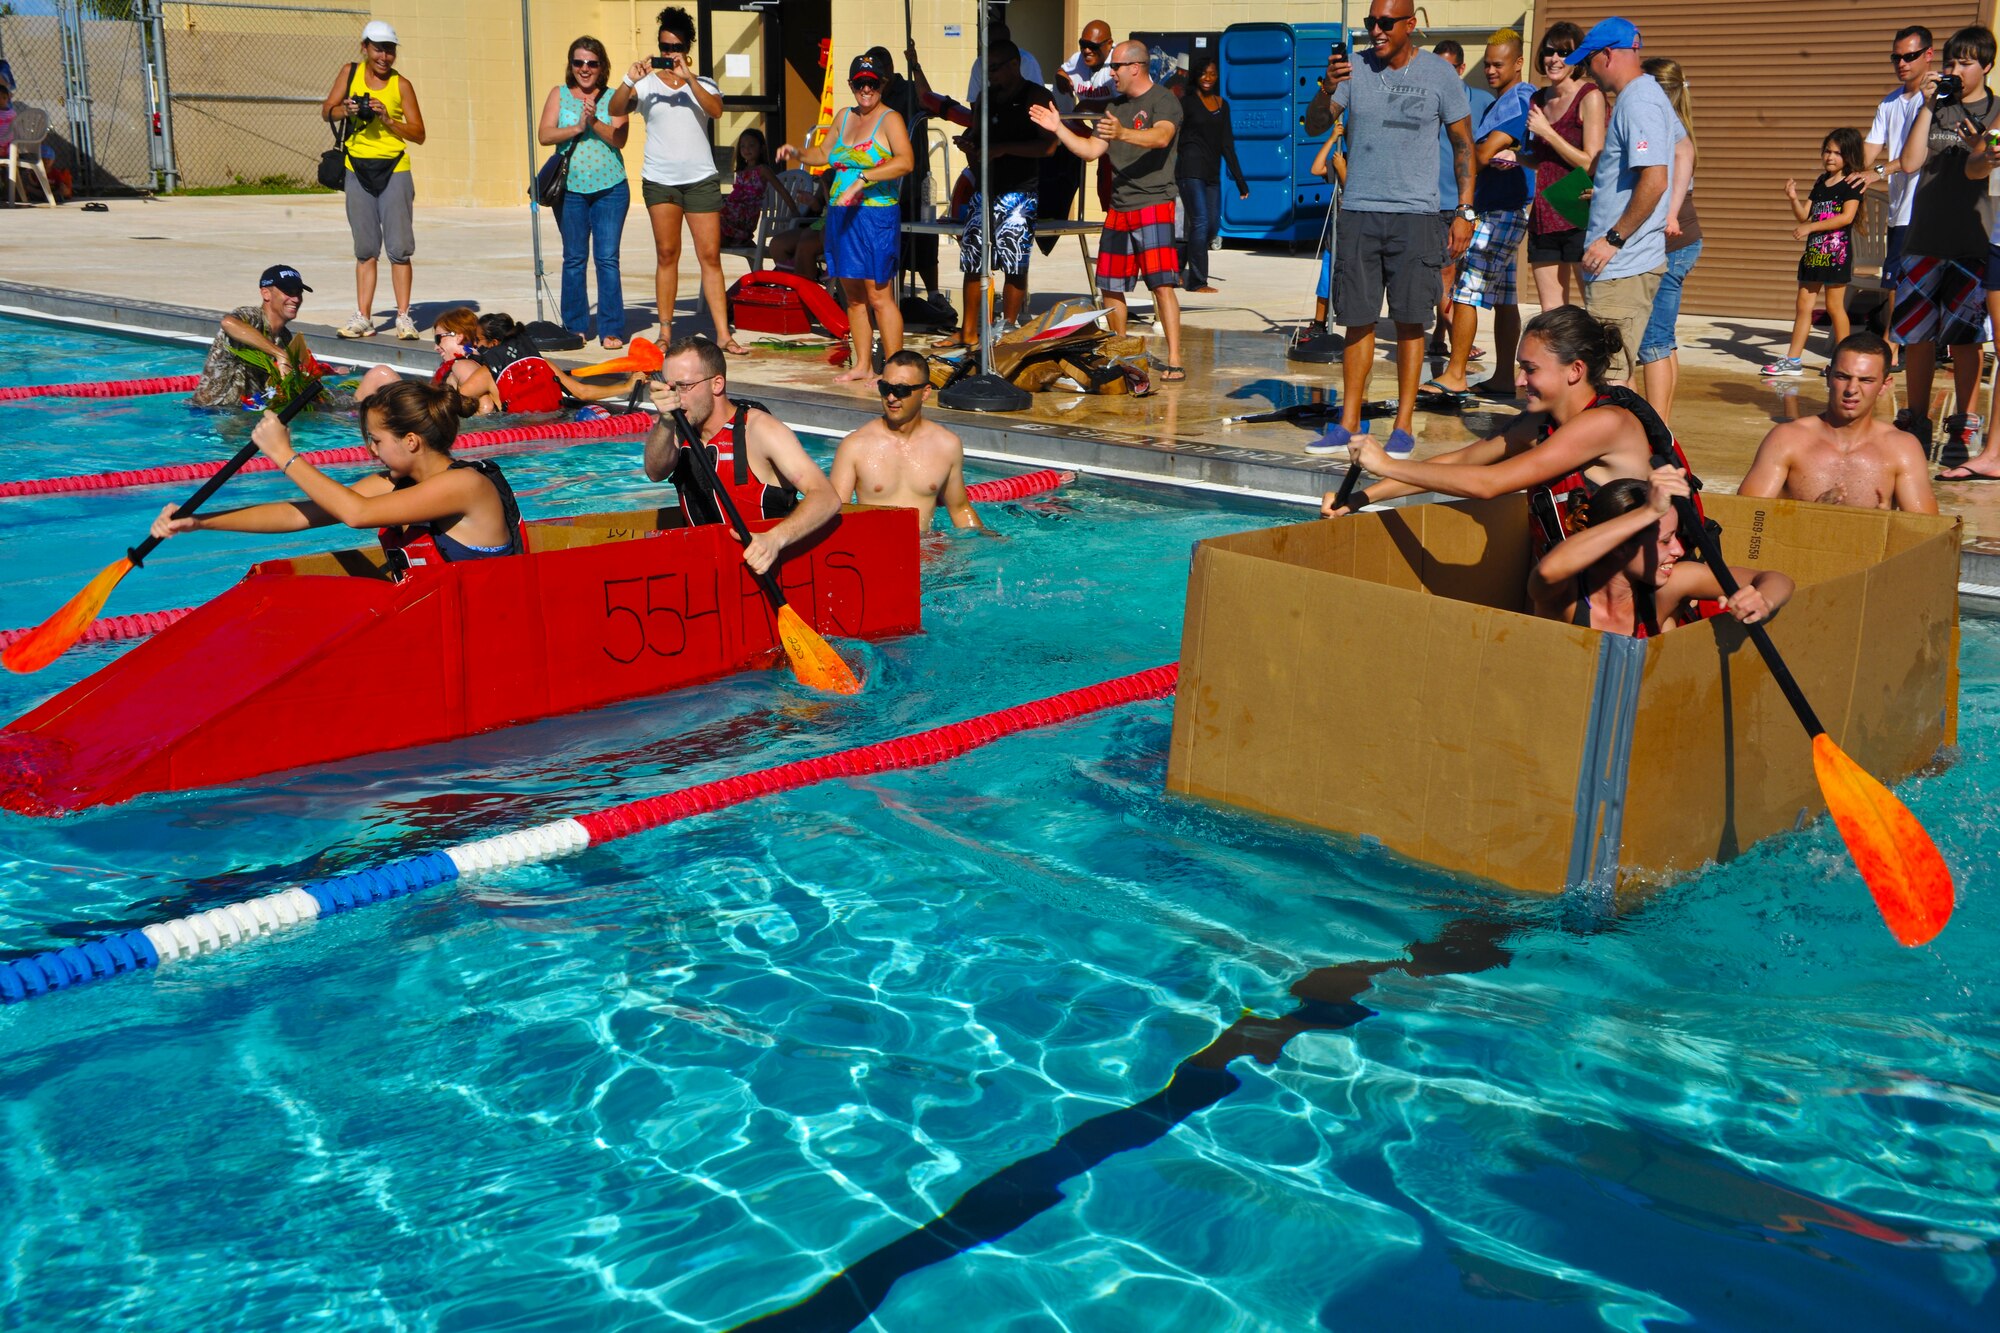 Members of the 554th  RED HORSE Squadron and the 36th Logistics Readiness Squadron Fuels Management Flight race their makeshift boats made with cardboard boxes and duct tape for a cardboard boat race May 24, 2013, on Andersen Air Force Base, Guam. The contest was part of the Memorial Day Bash, which also featured face painting, water buffalo riding, a dunk booth and a moon bounce obstacle course for the families. (U.S. Air Force photo by Senior Airman Robert Hicks/Released)